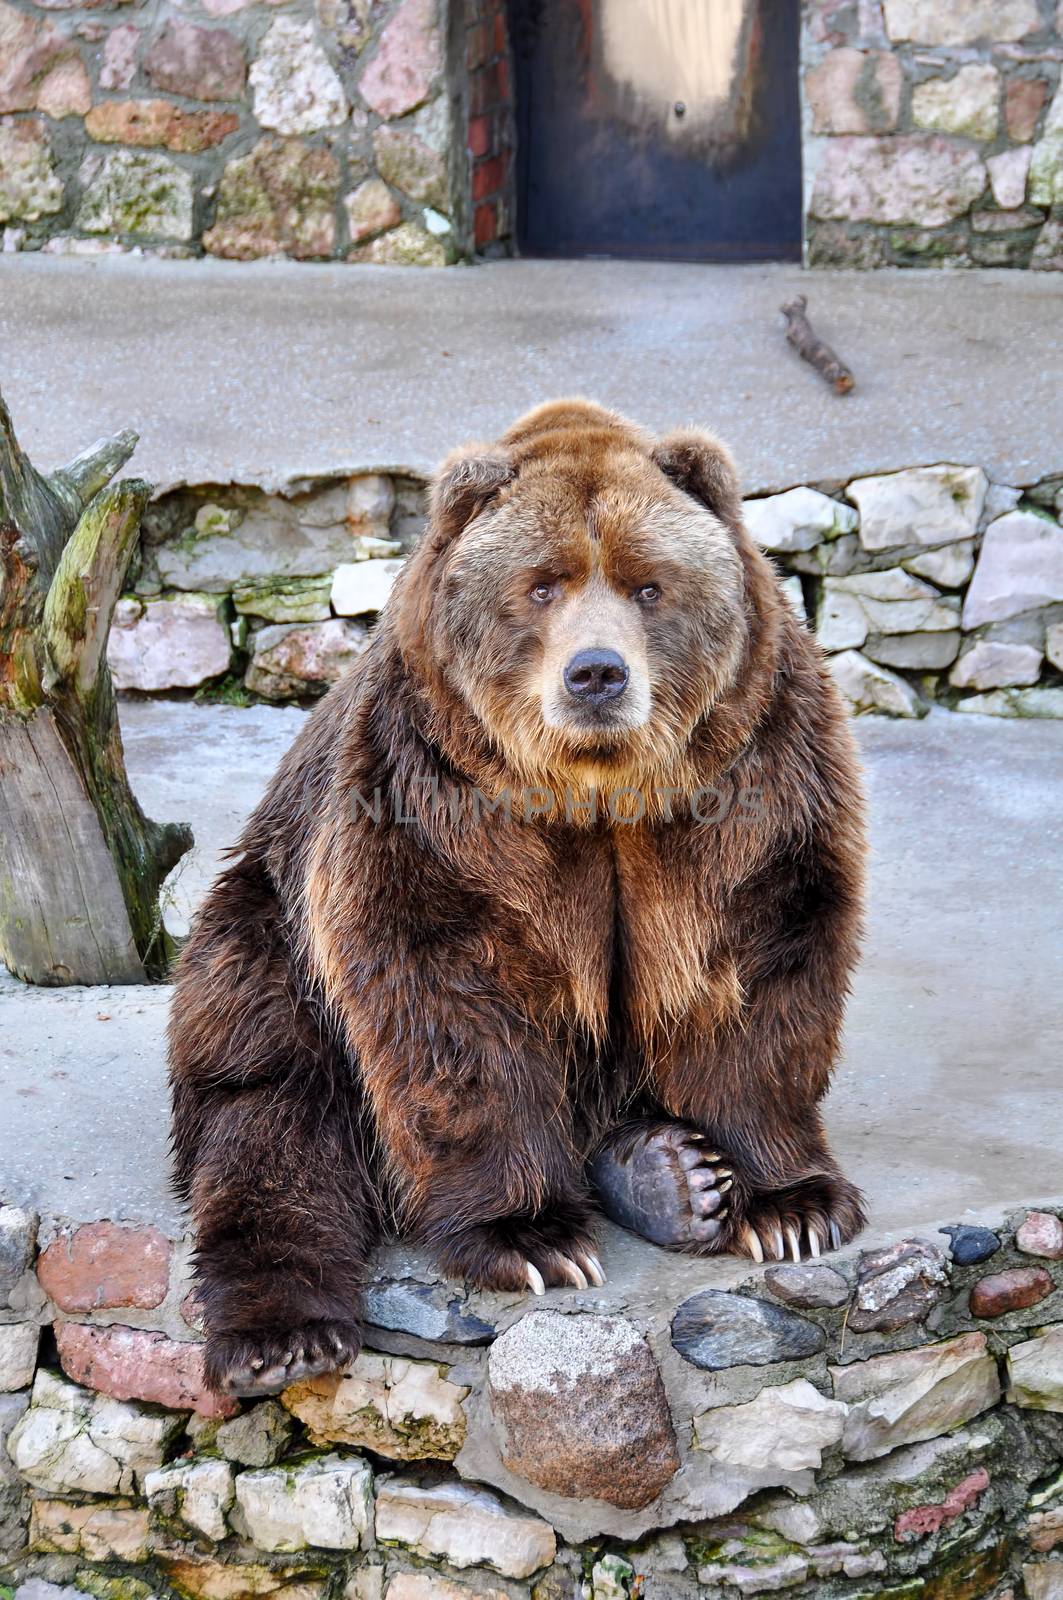 Grizzly brown bear looking at people in zoo by infinityyy